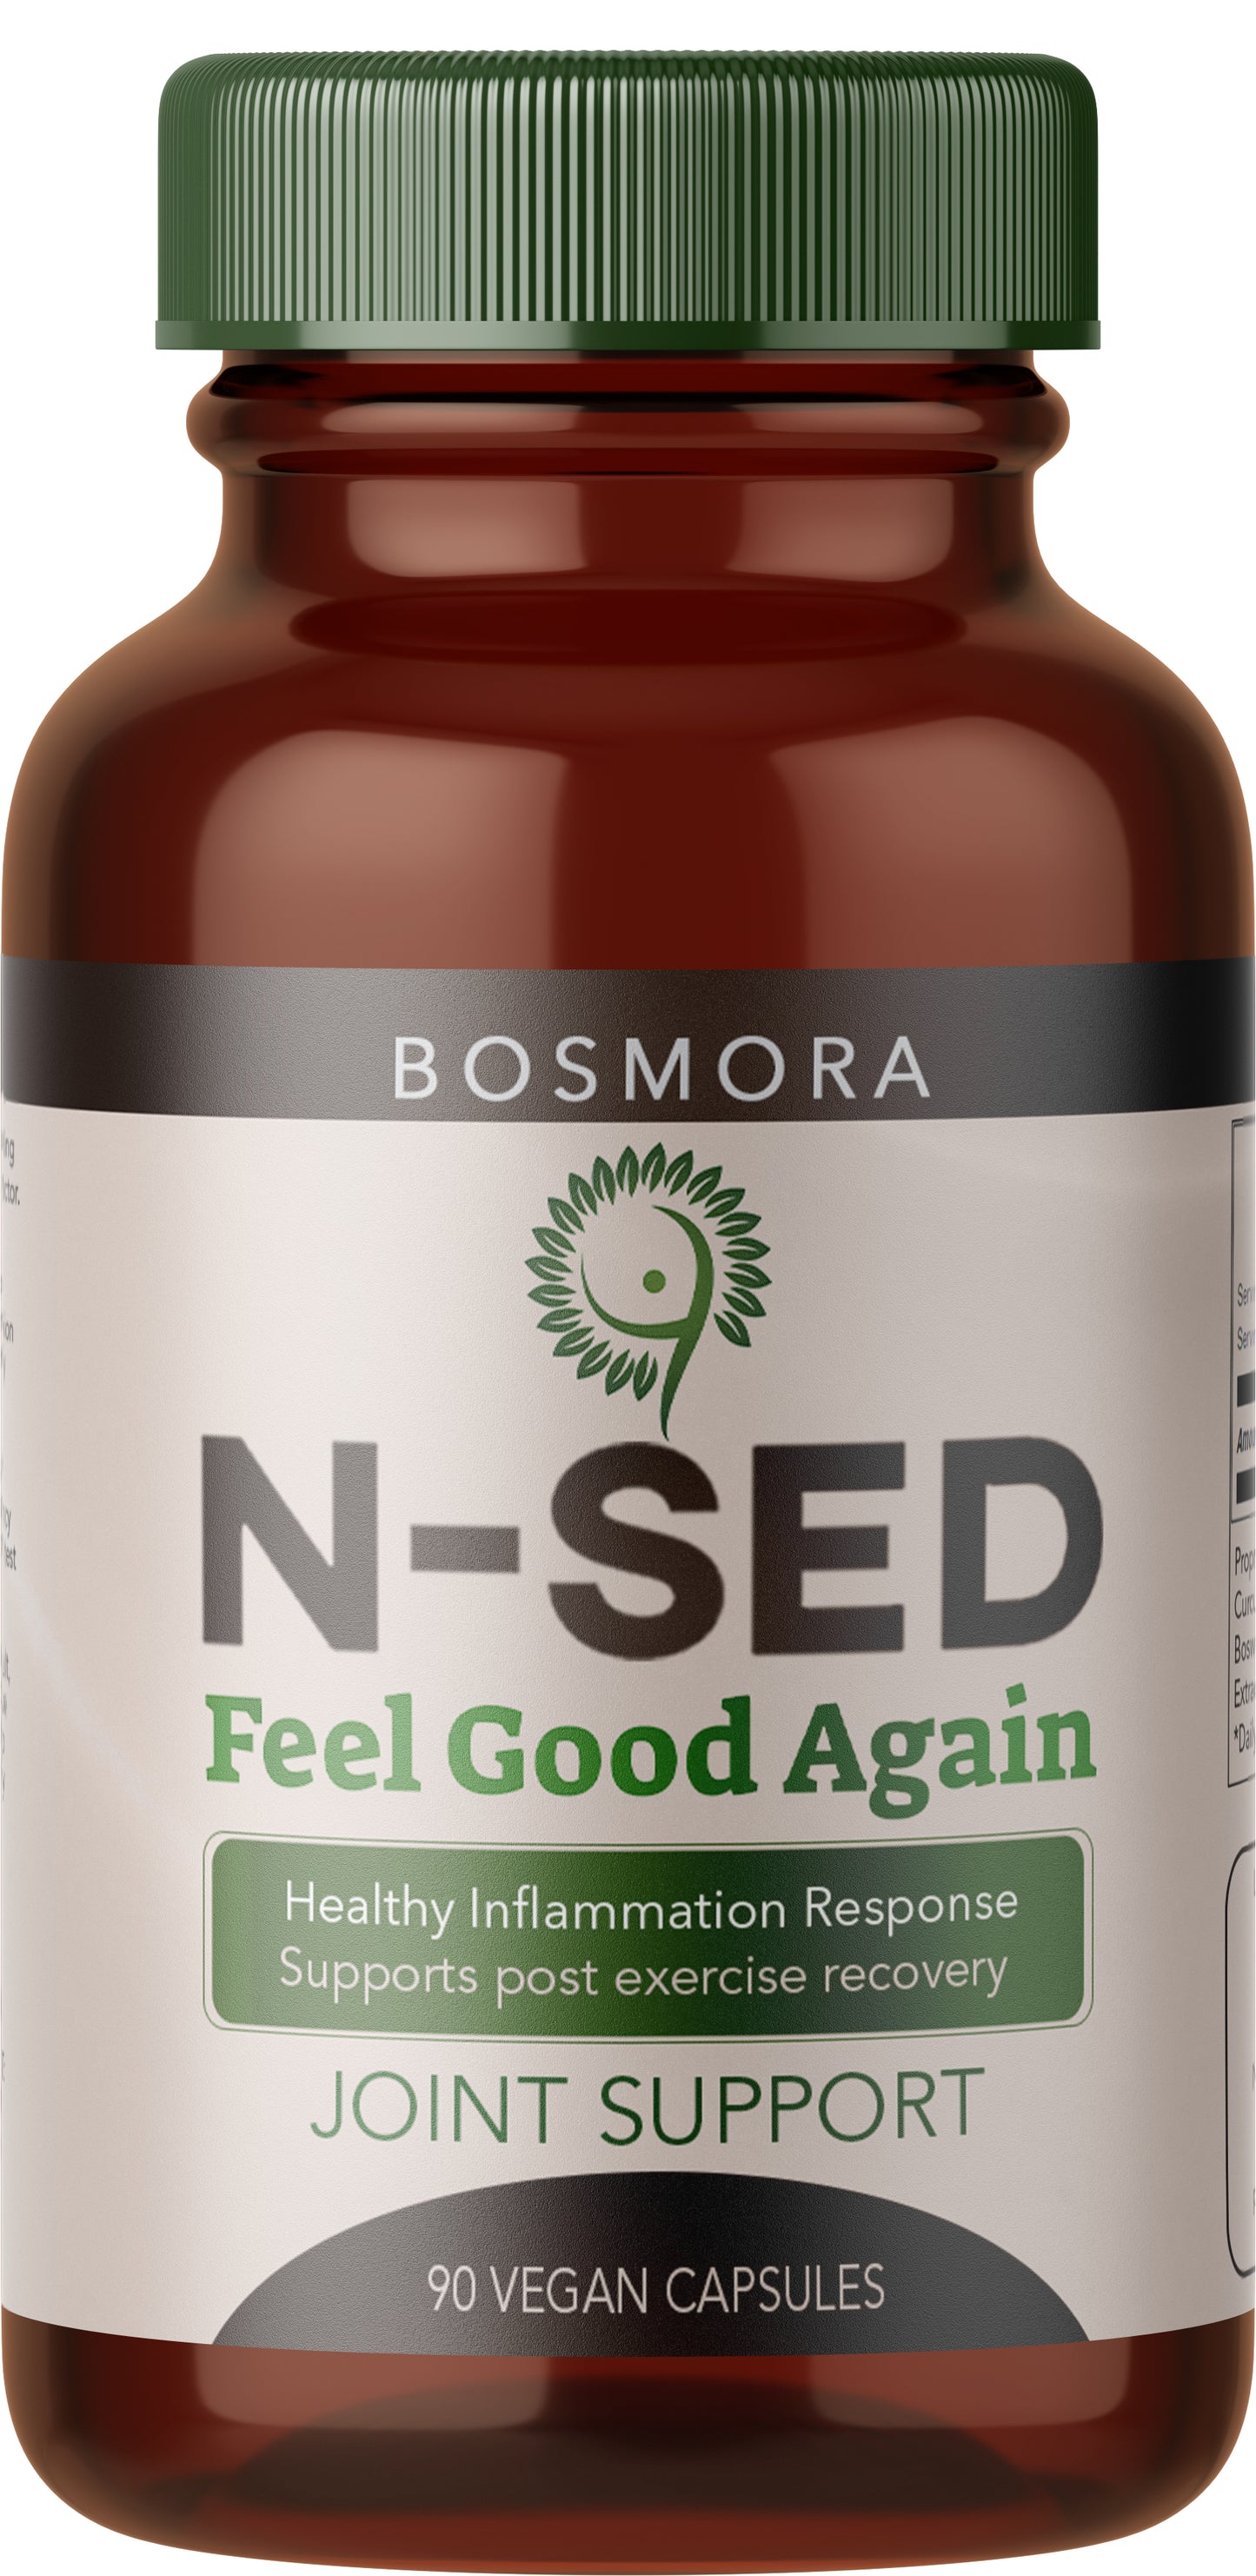 N-SED by Bosmora - One 90 count bottle